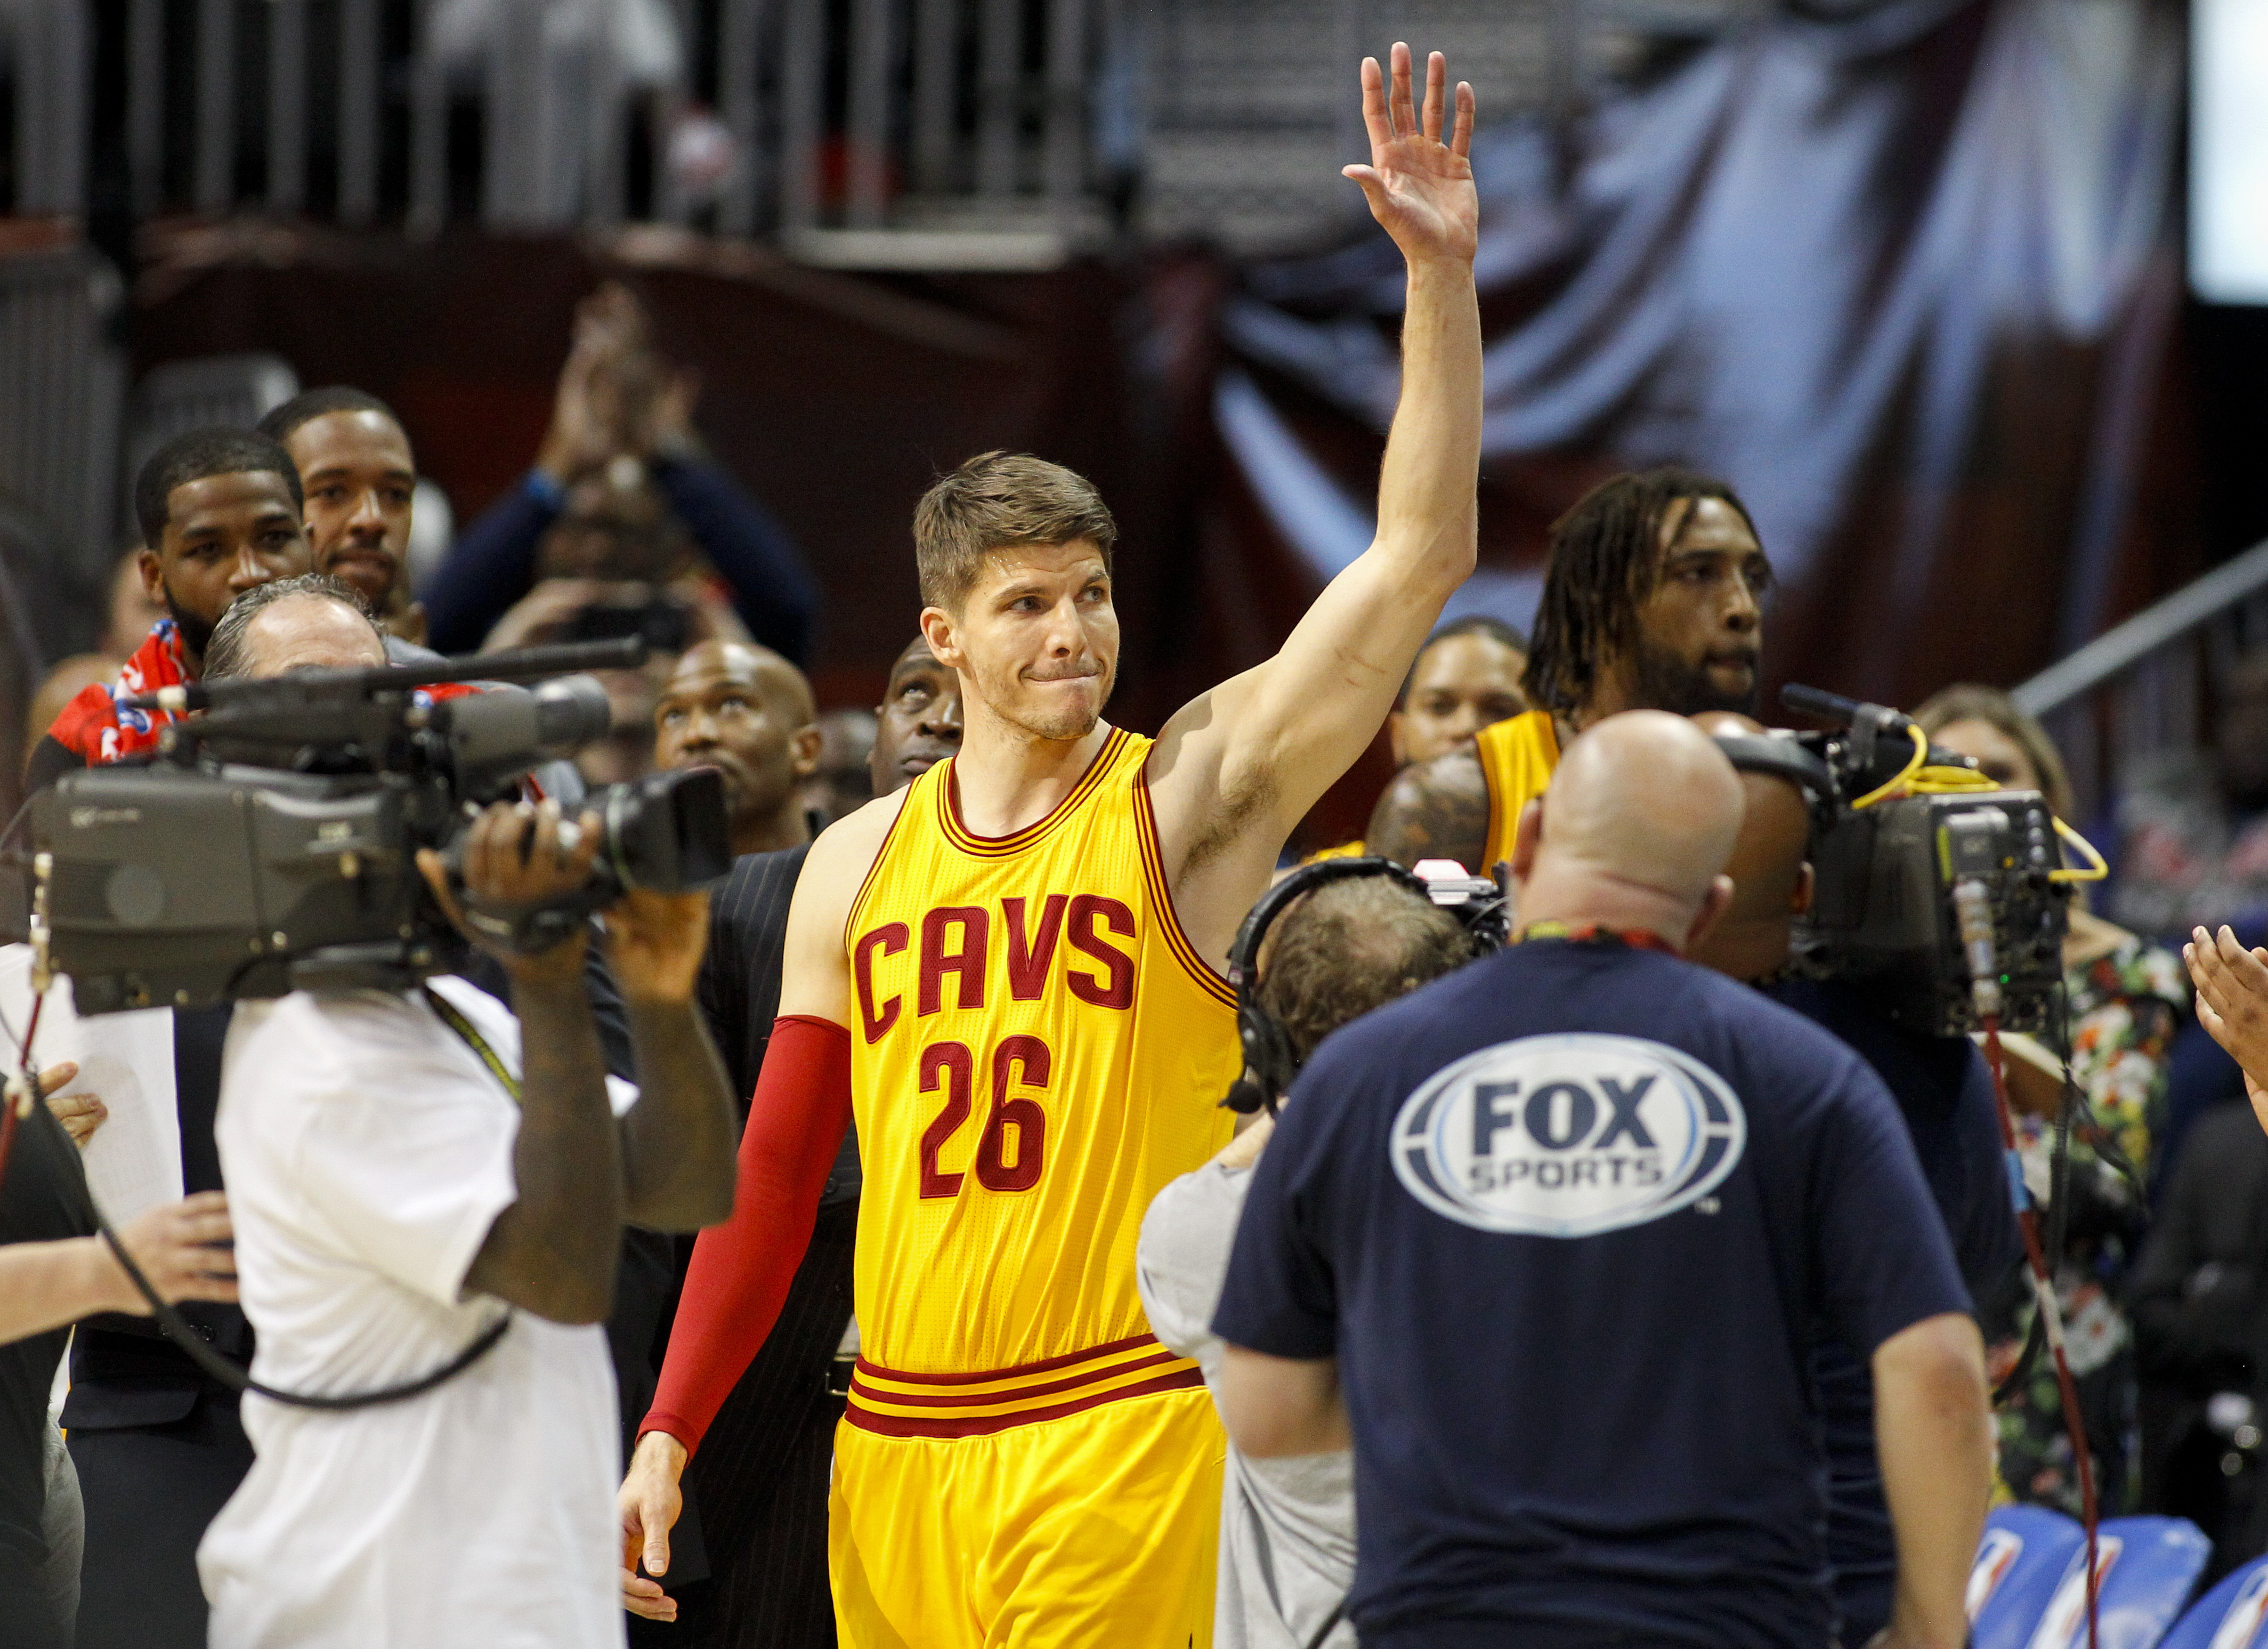 Cleveland Cavaliers guard Kyle Korver (26) waves to the crowd after being honored in the first half of an NBA basketball game against the Atlanta Hawks, Friday, March 3, 2017, in Atlanta. (AP Photo/Brett Davis)